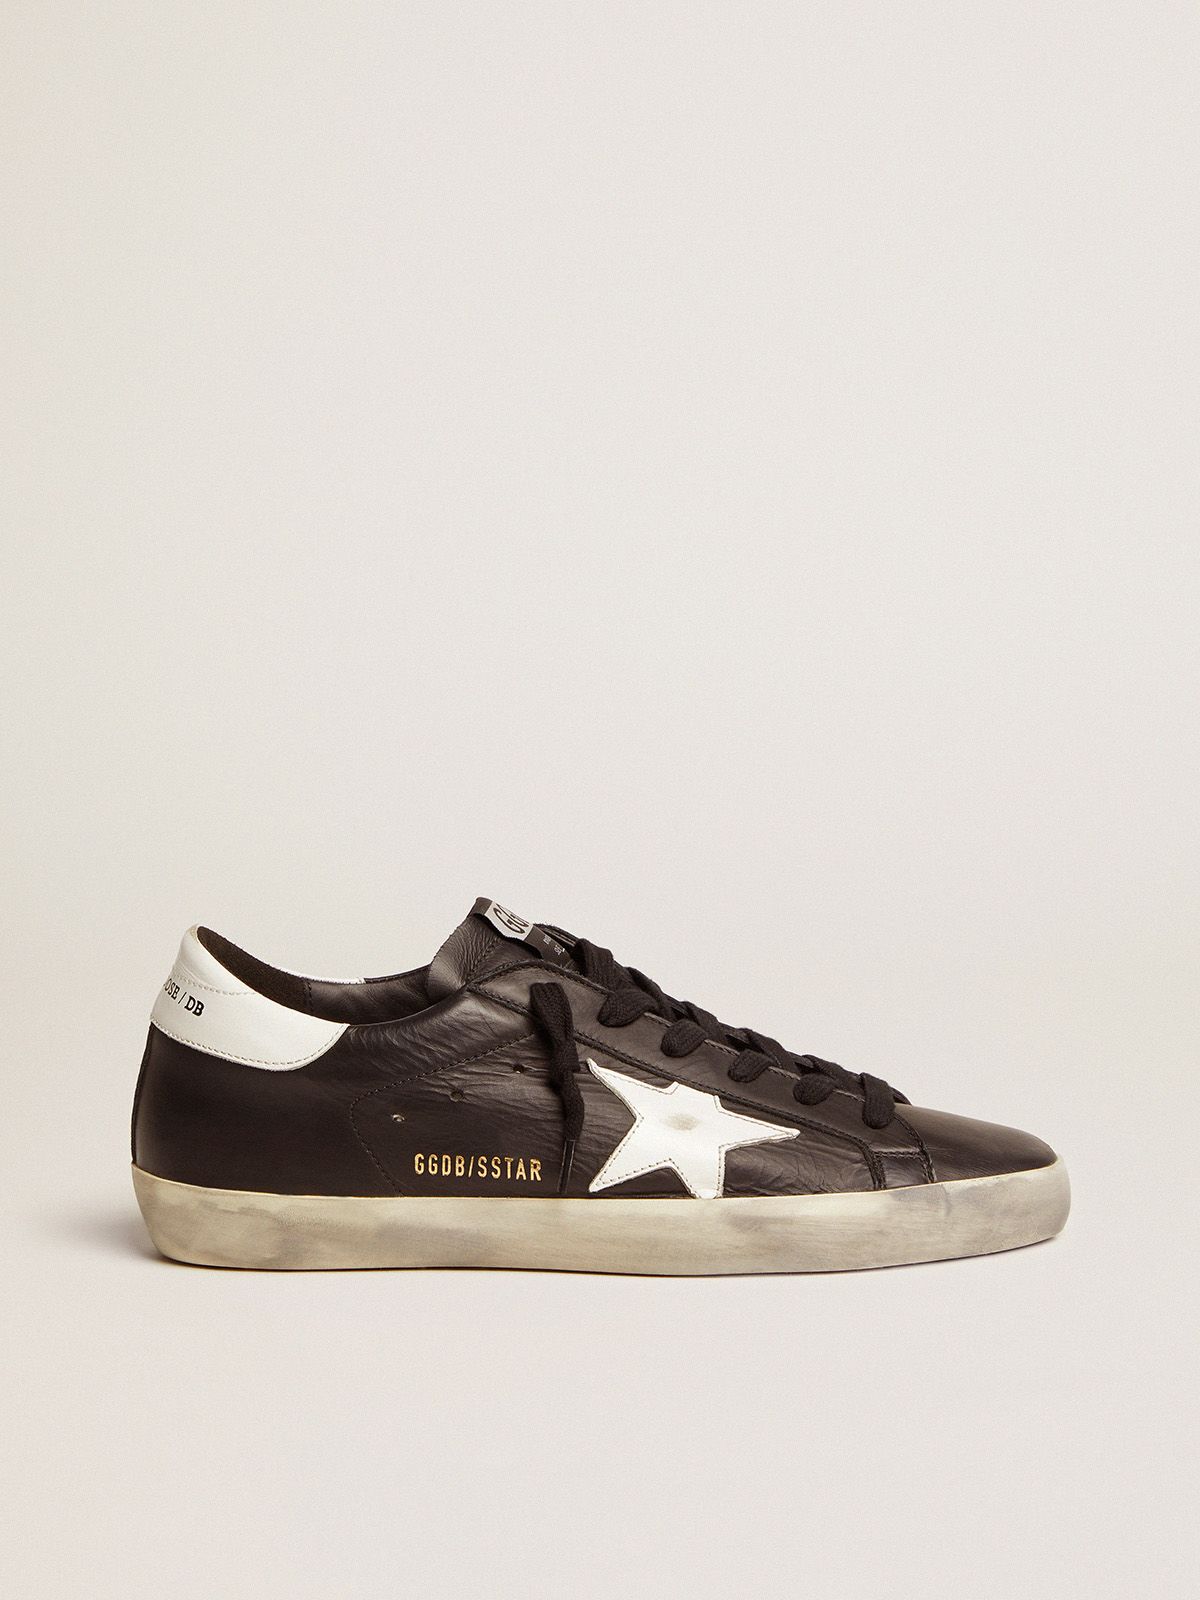 golden goose leather in contrast tab with star heel and sneakers Superstar